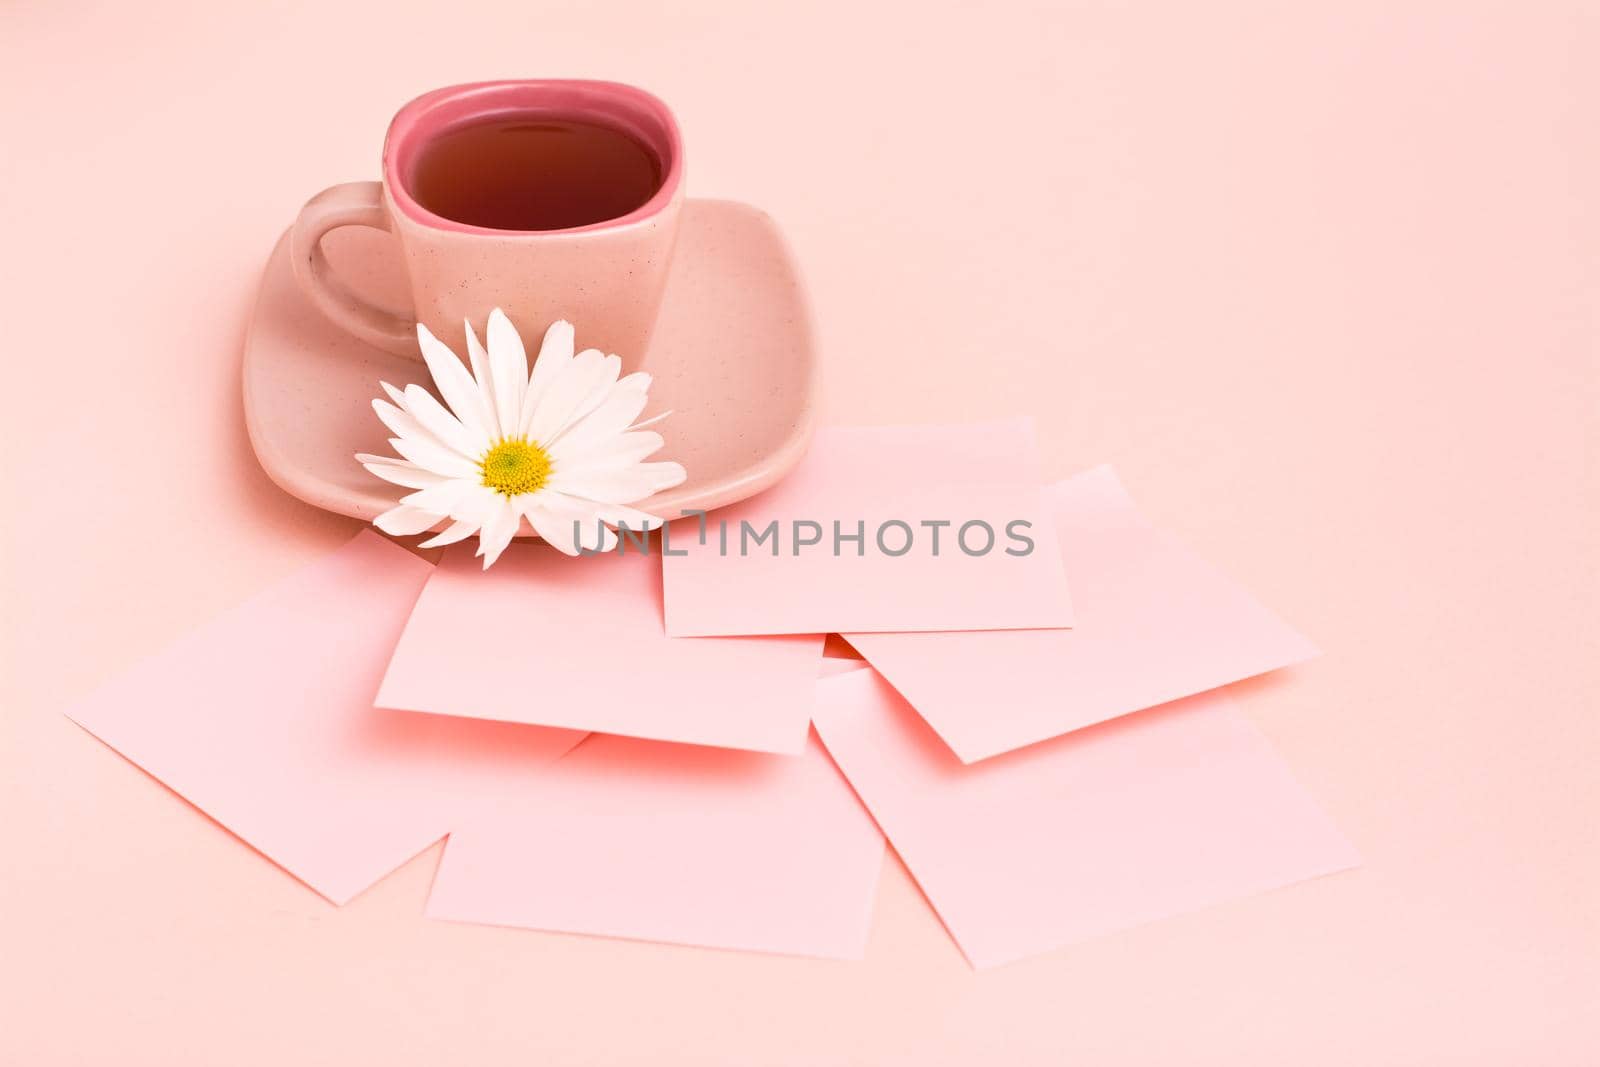 The concept is pink. Pink drink in a coffee cup,  writing sheets and chrysanthemum on a pink background. Copy space